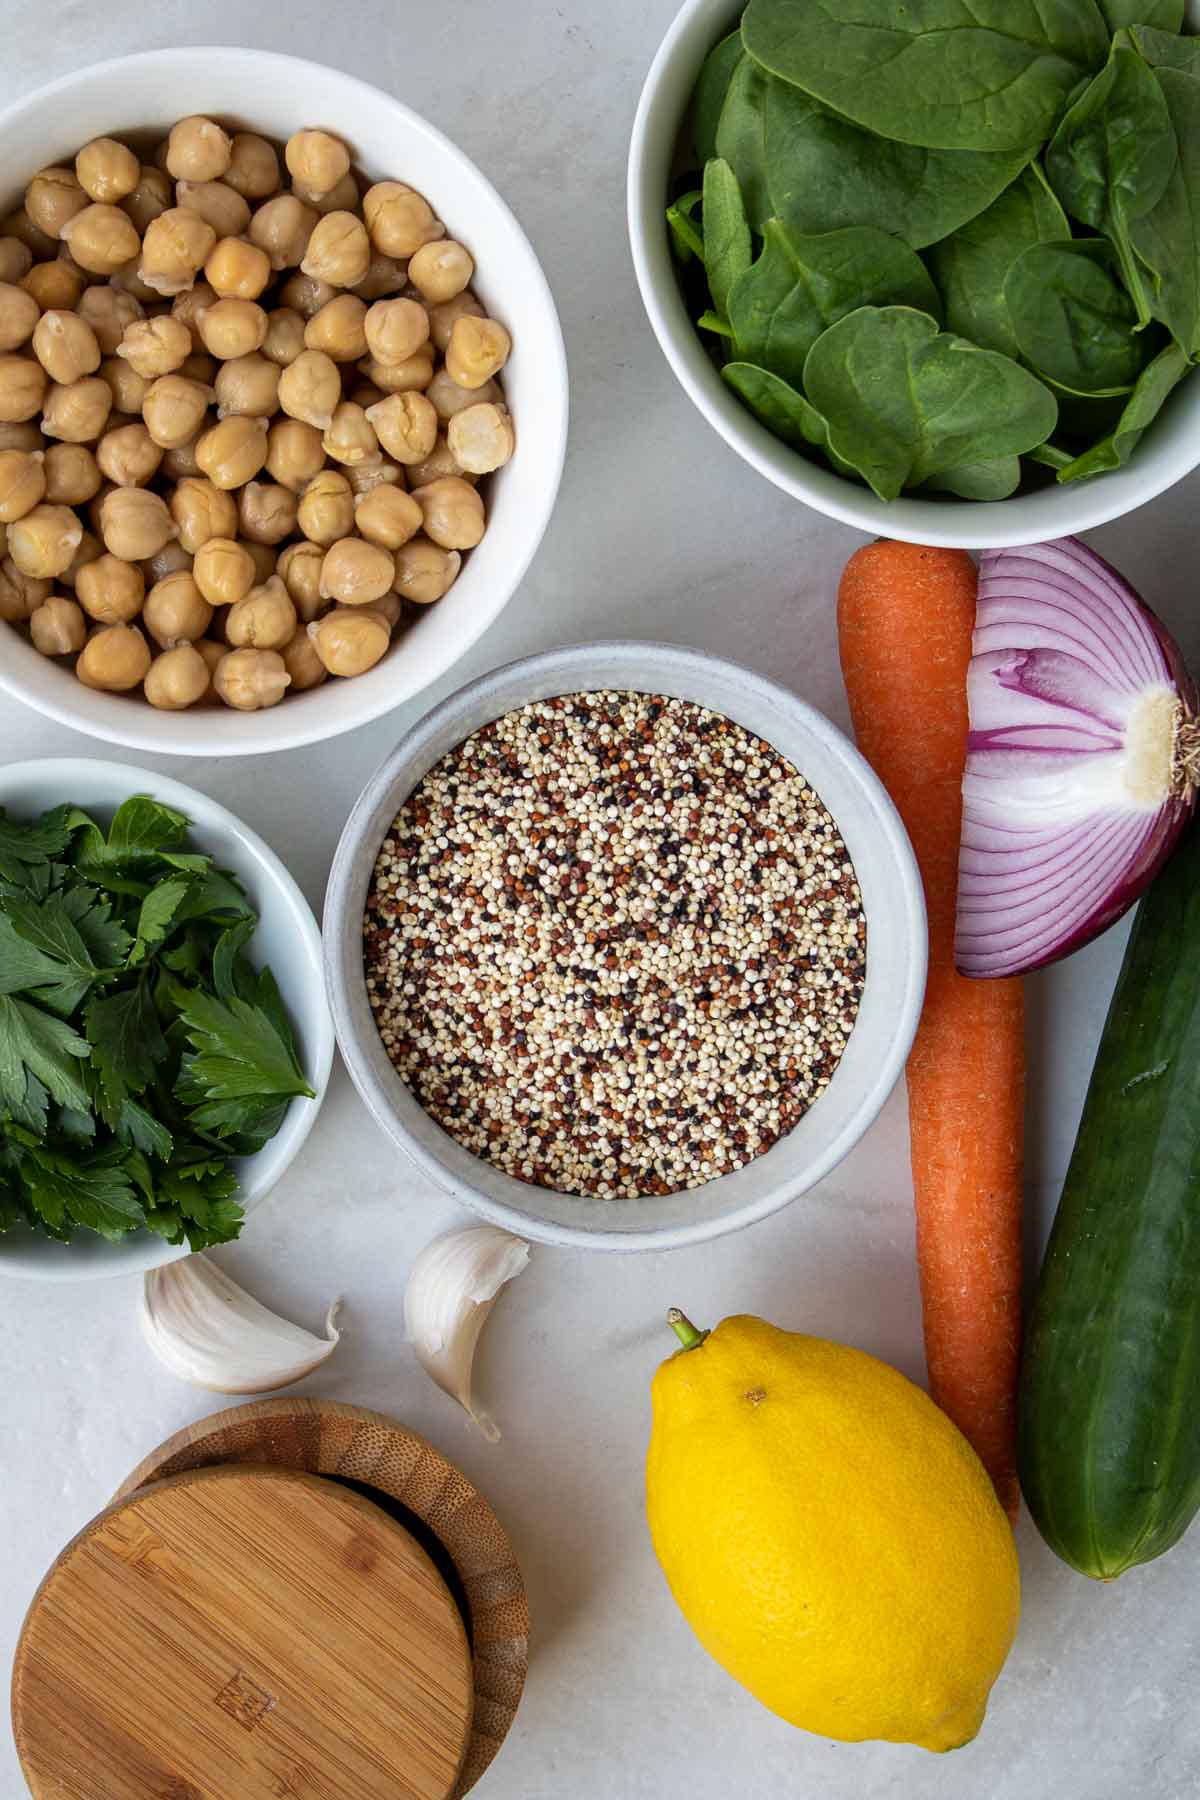 Ingredients for quinoa chickpea salad: canned chickpeas, quinoa, cucumber, carrot, red onion, spinach, parsley, olive oil, lemon, garlic, salt, and pepper.